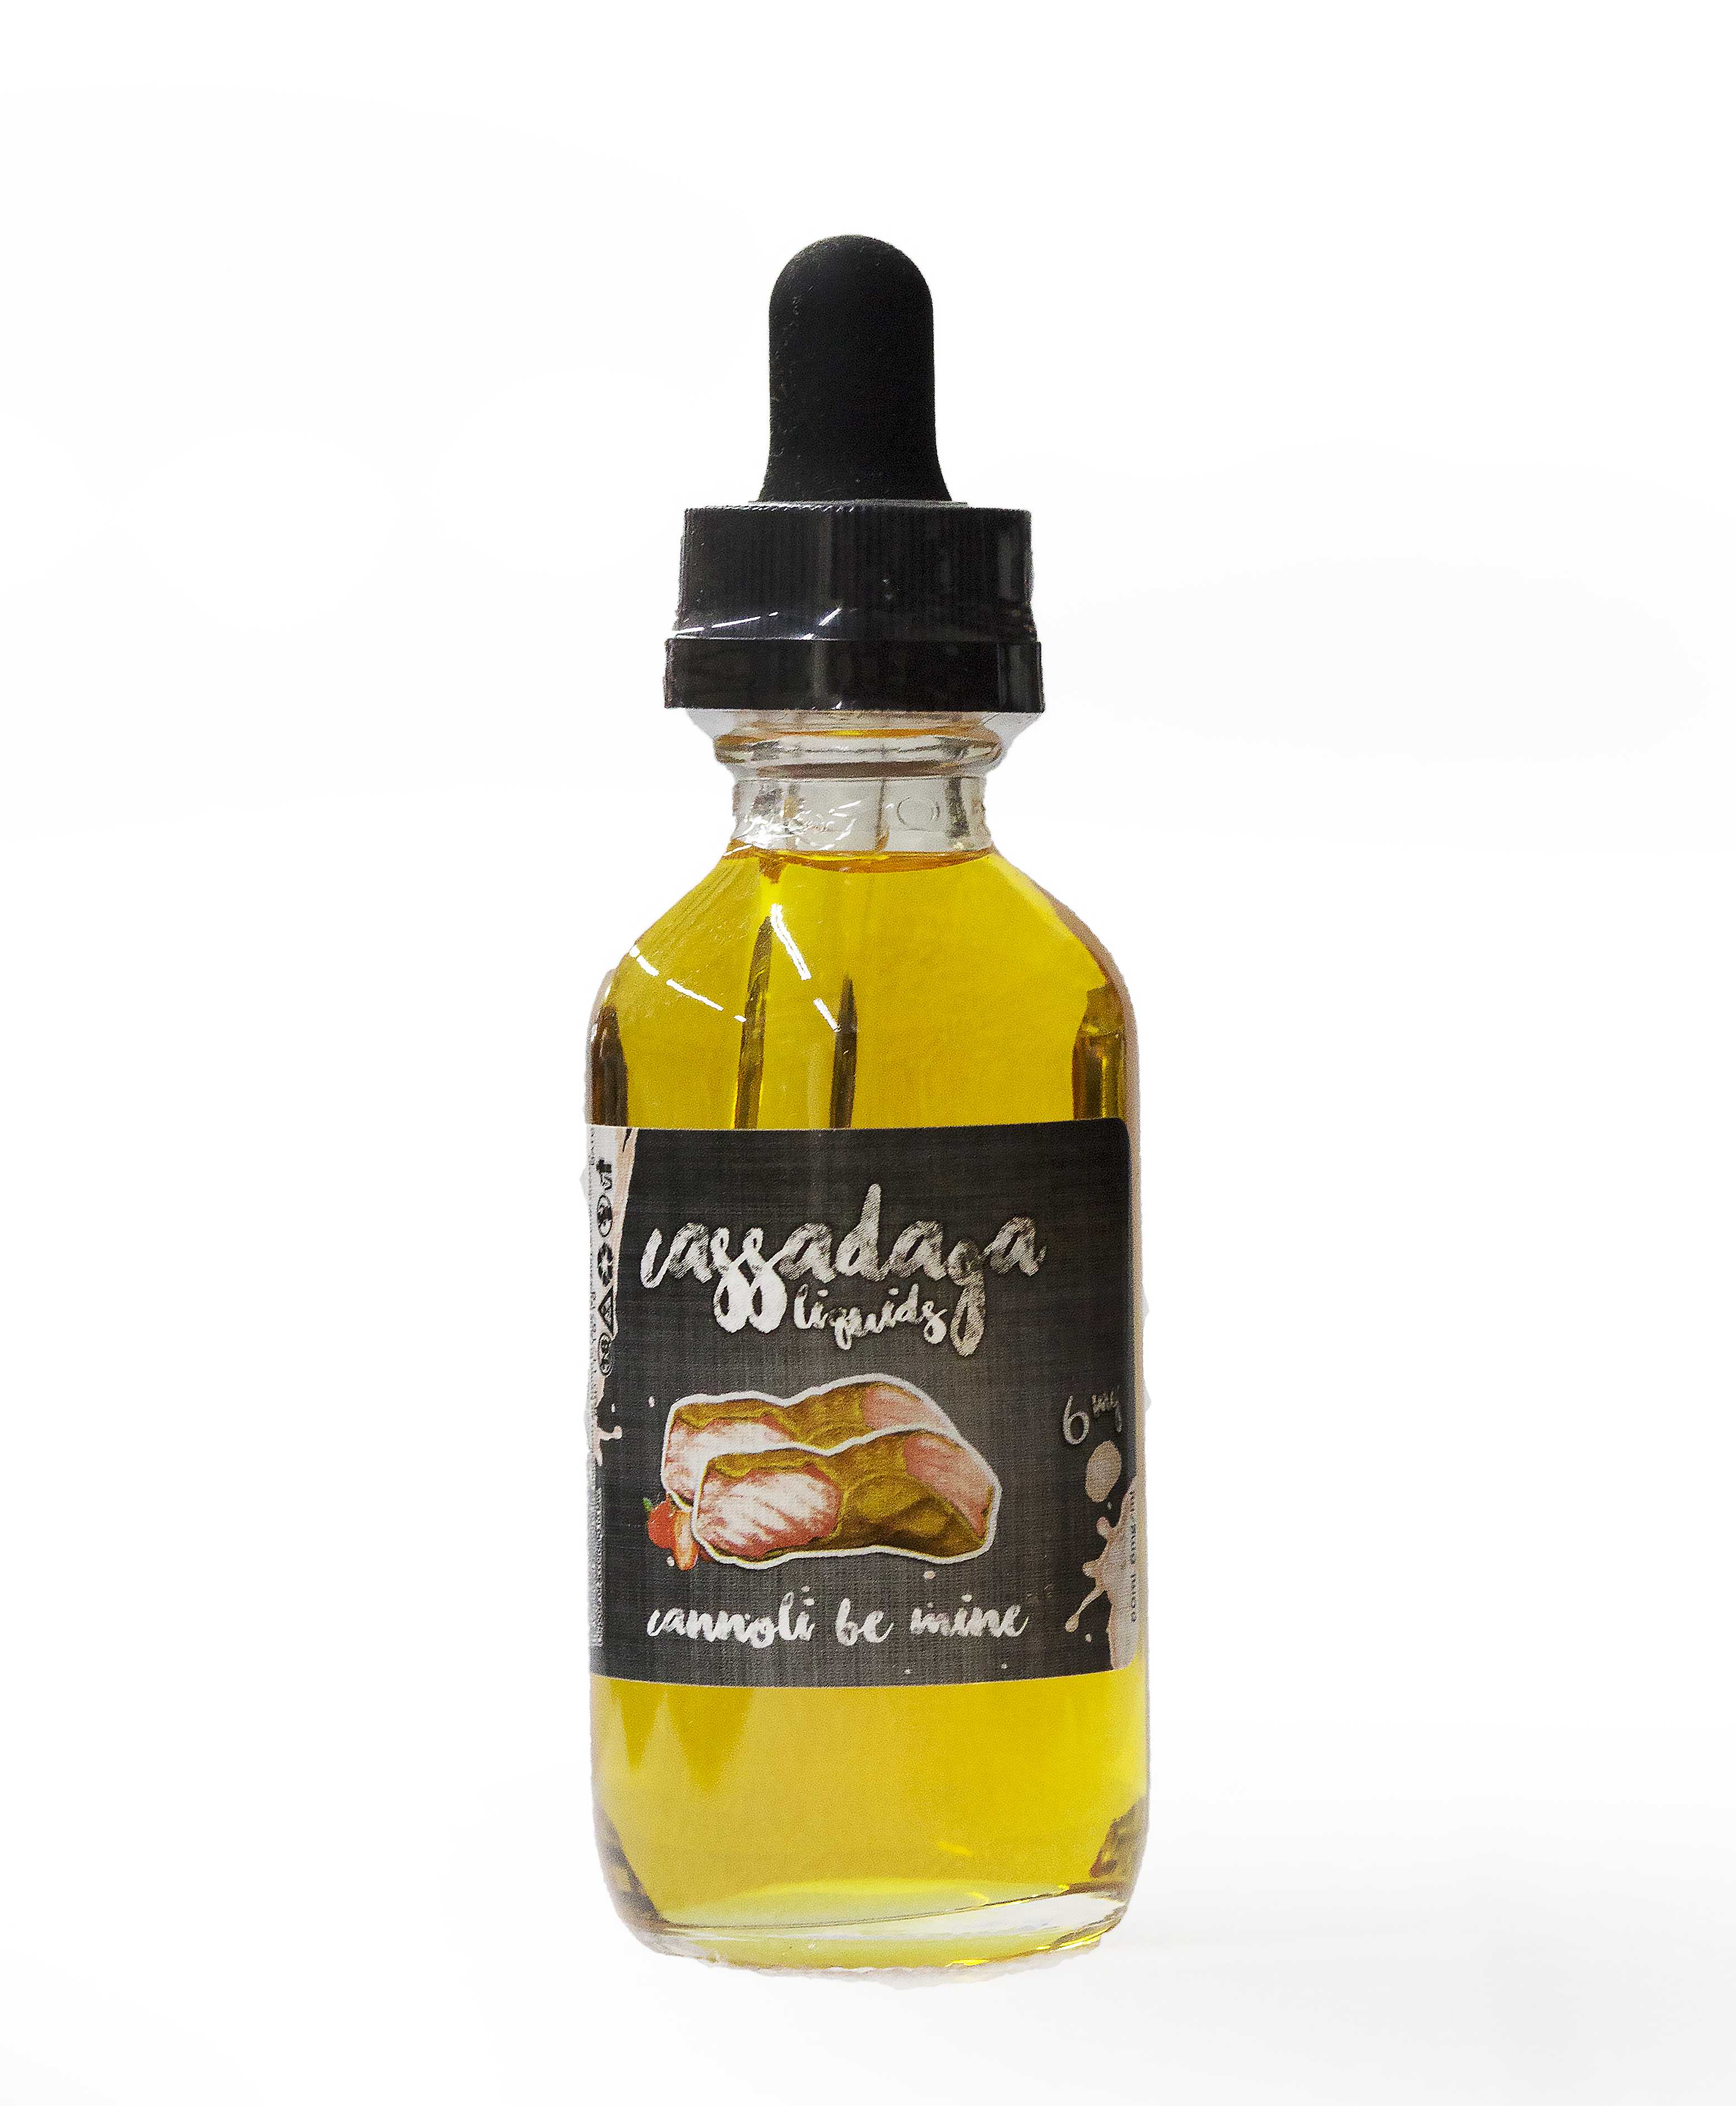 Get Your eJuice - Cannoli Be Mine